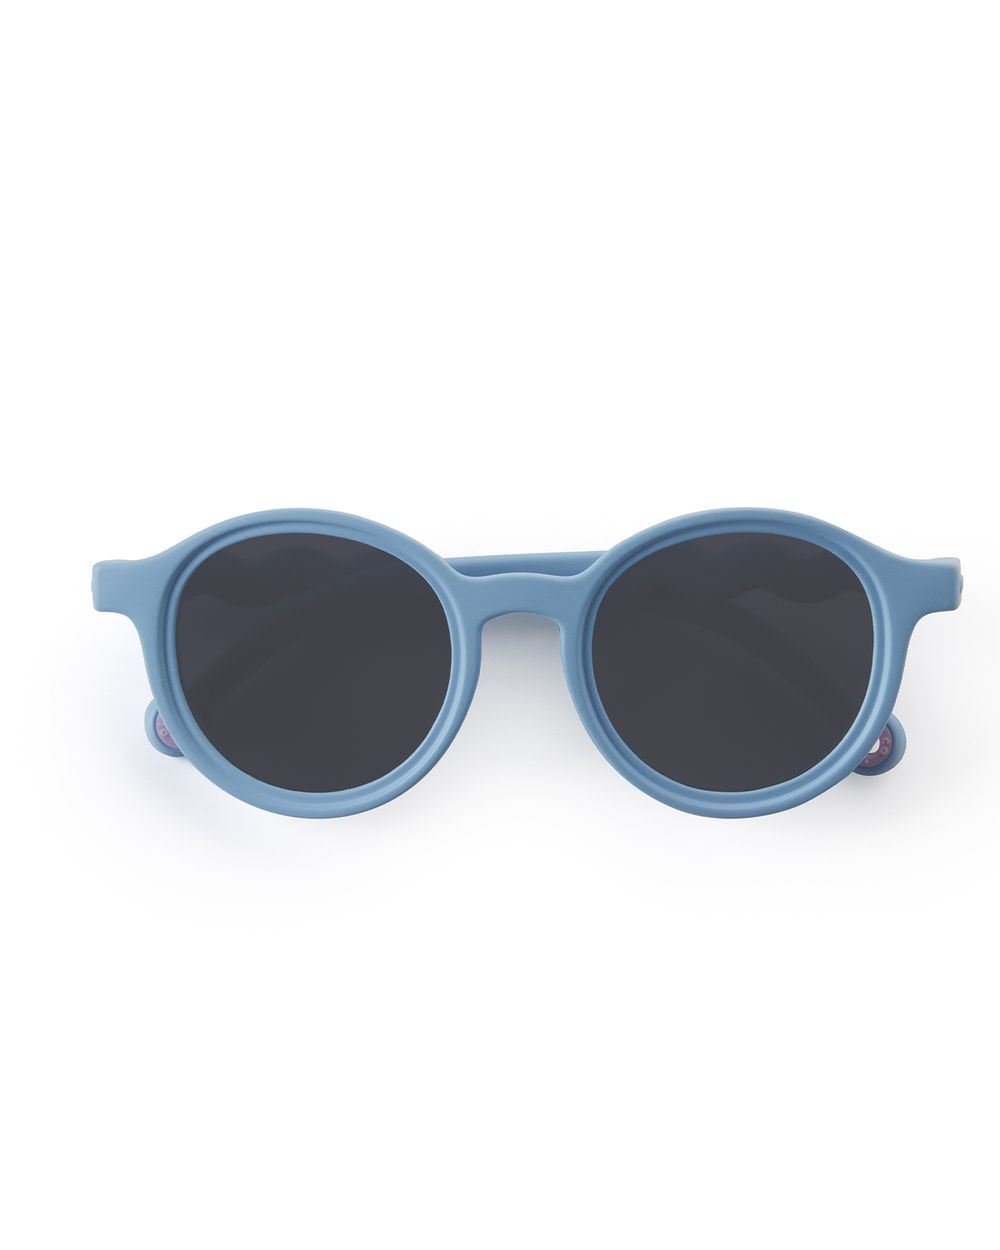 Toddler Oval Sunglasses Reef Blue